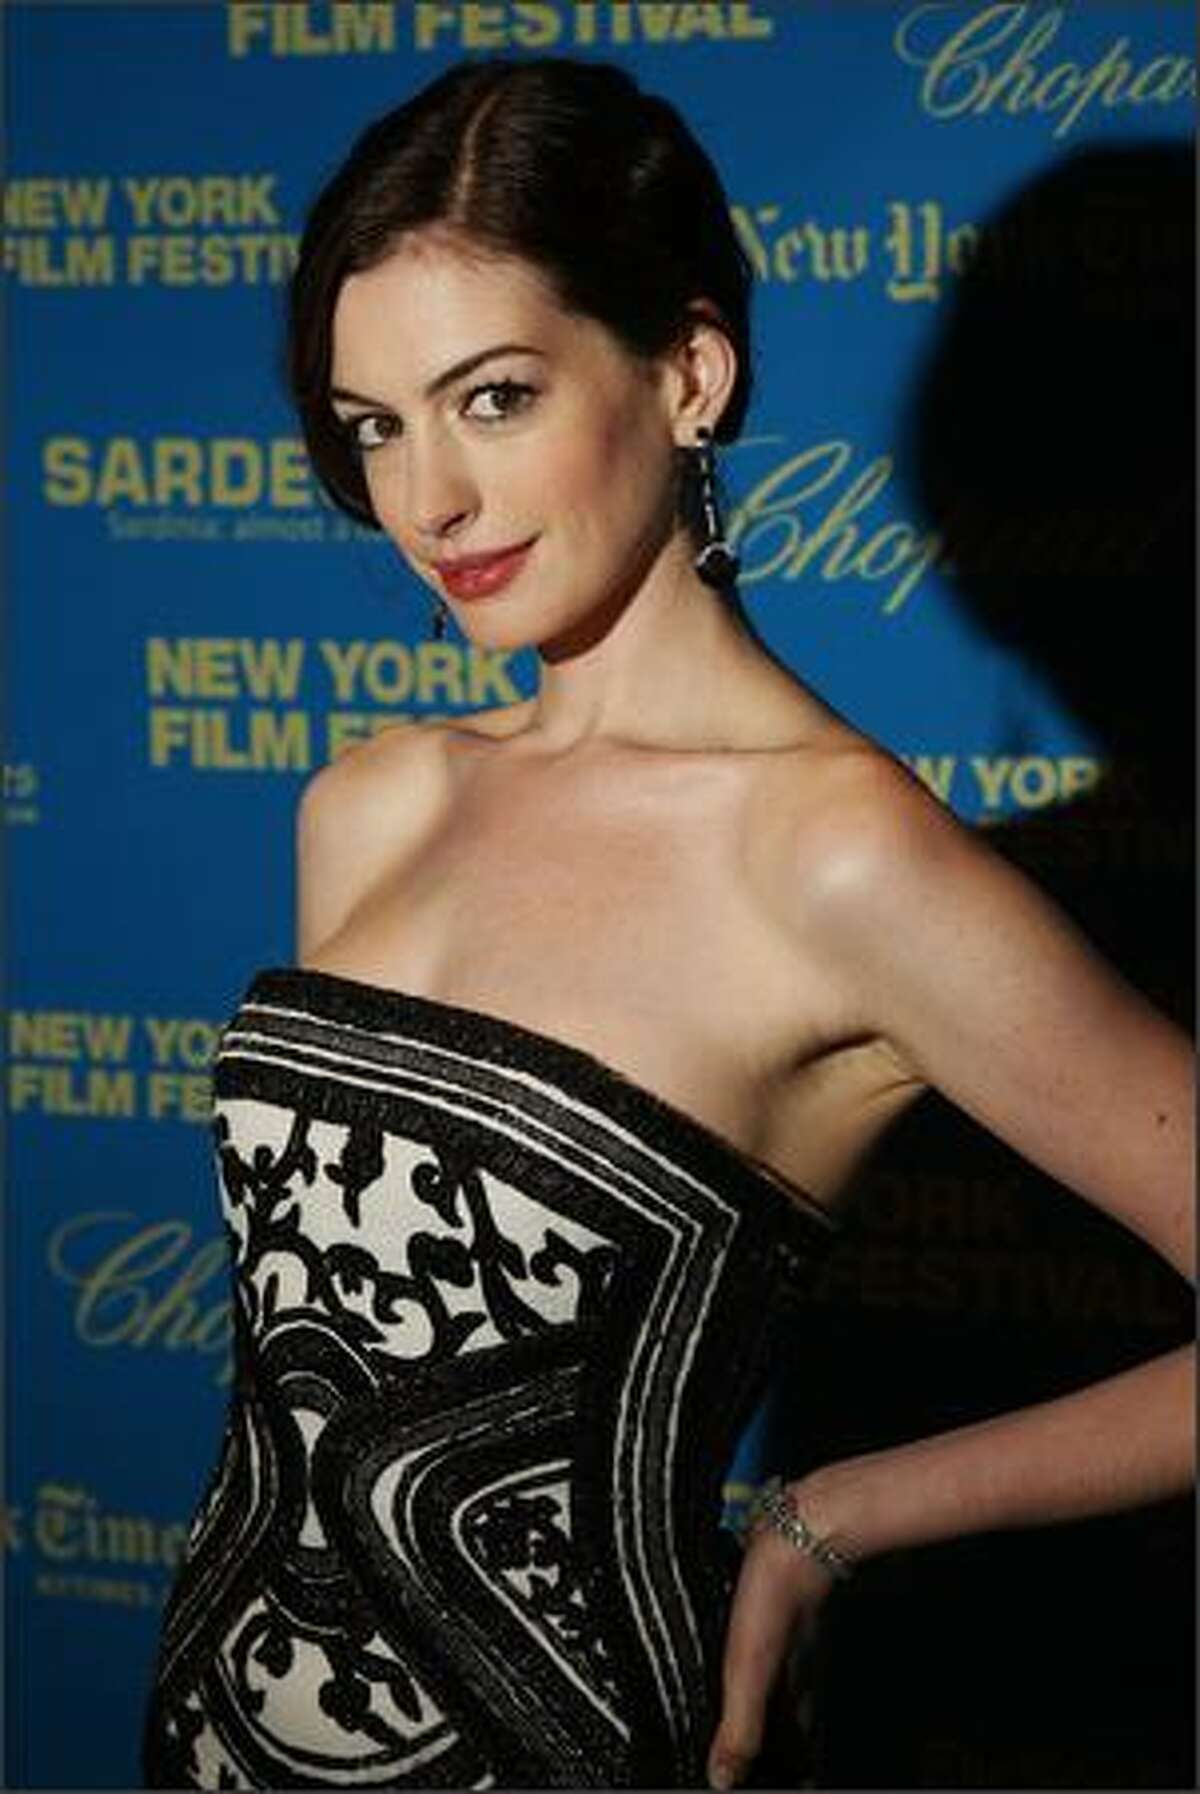 Actress Anne Hathaway attends the premiere of "The Class" during the opening night of the 46th New York Film Festival at Avery Fisher Hall in New York City.